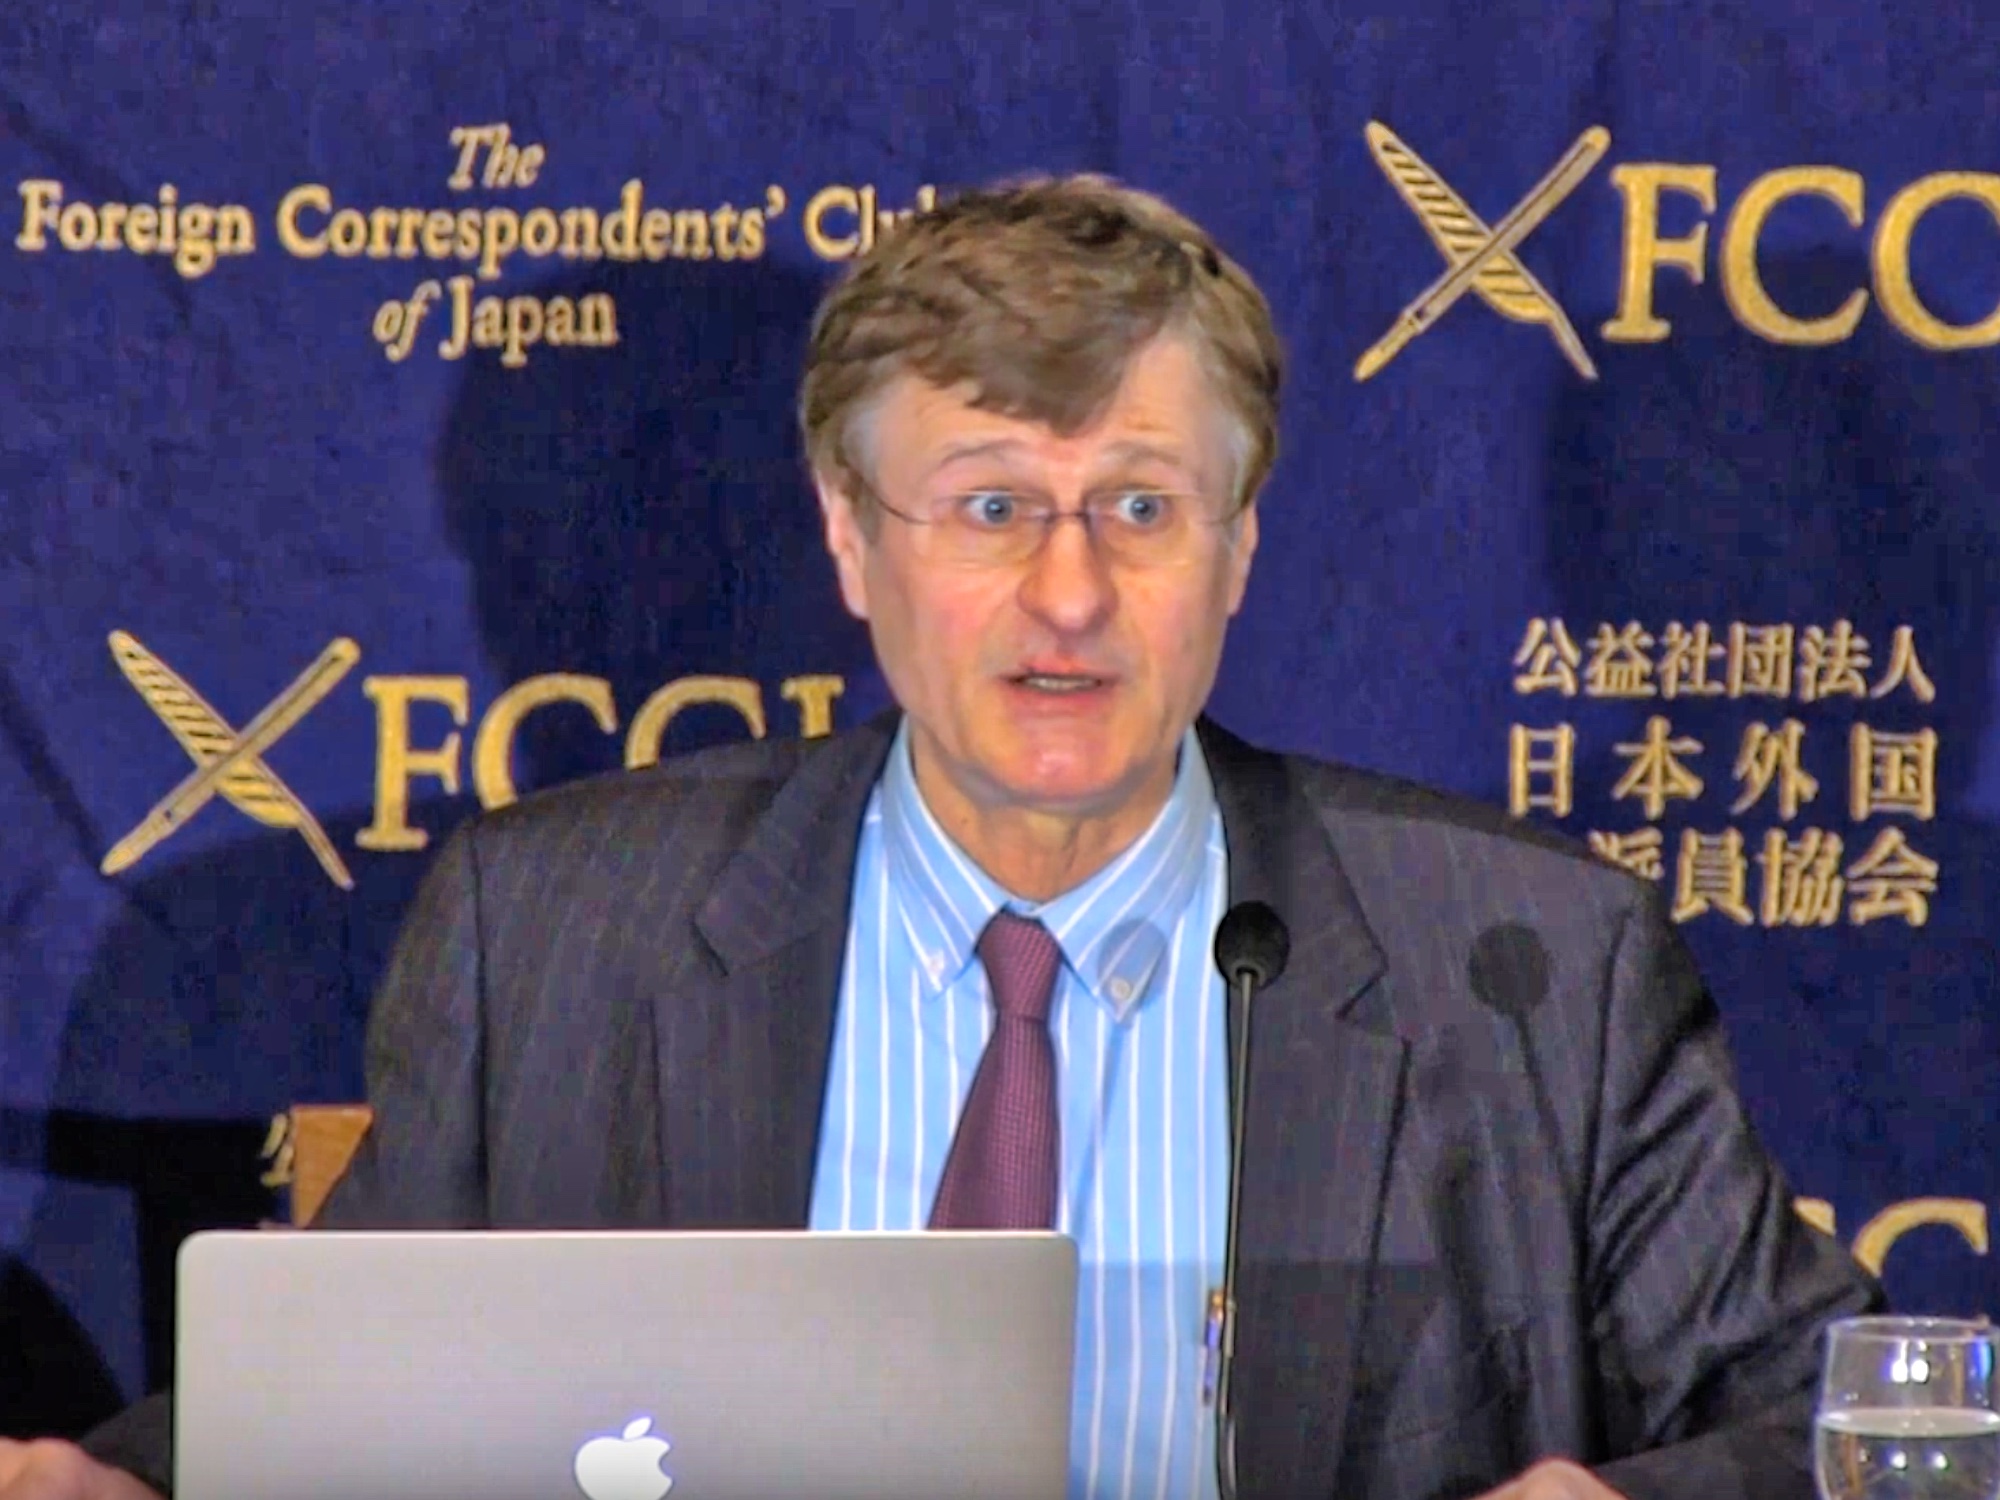 Corporate Governance Reforms in Japan, Gerhard Fasol at the Foreign Correspondents Club FCCJ 12 March 2018